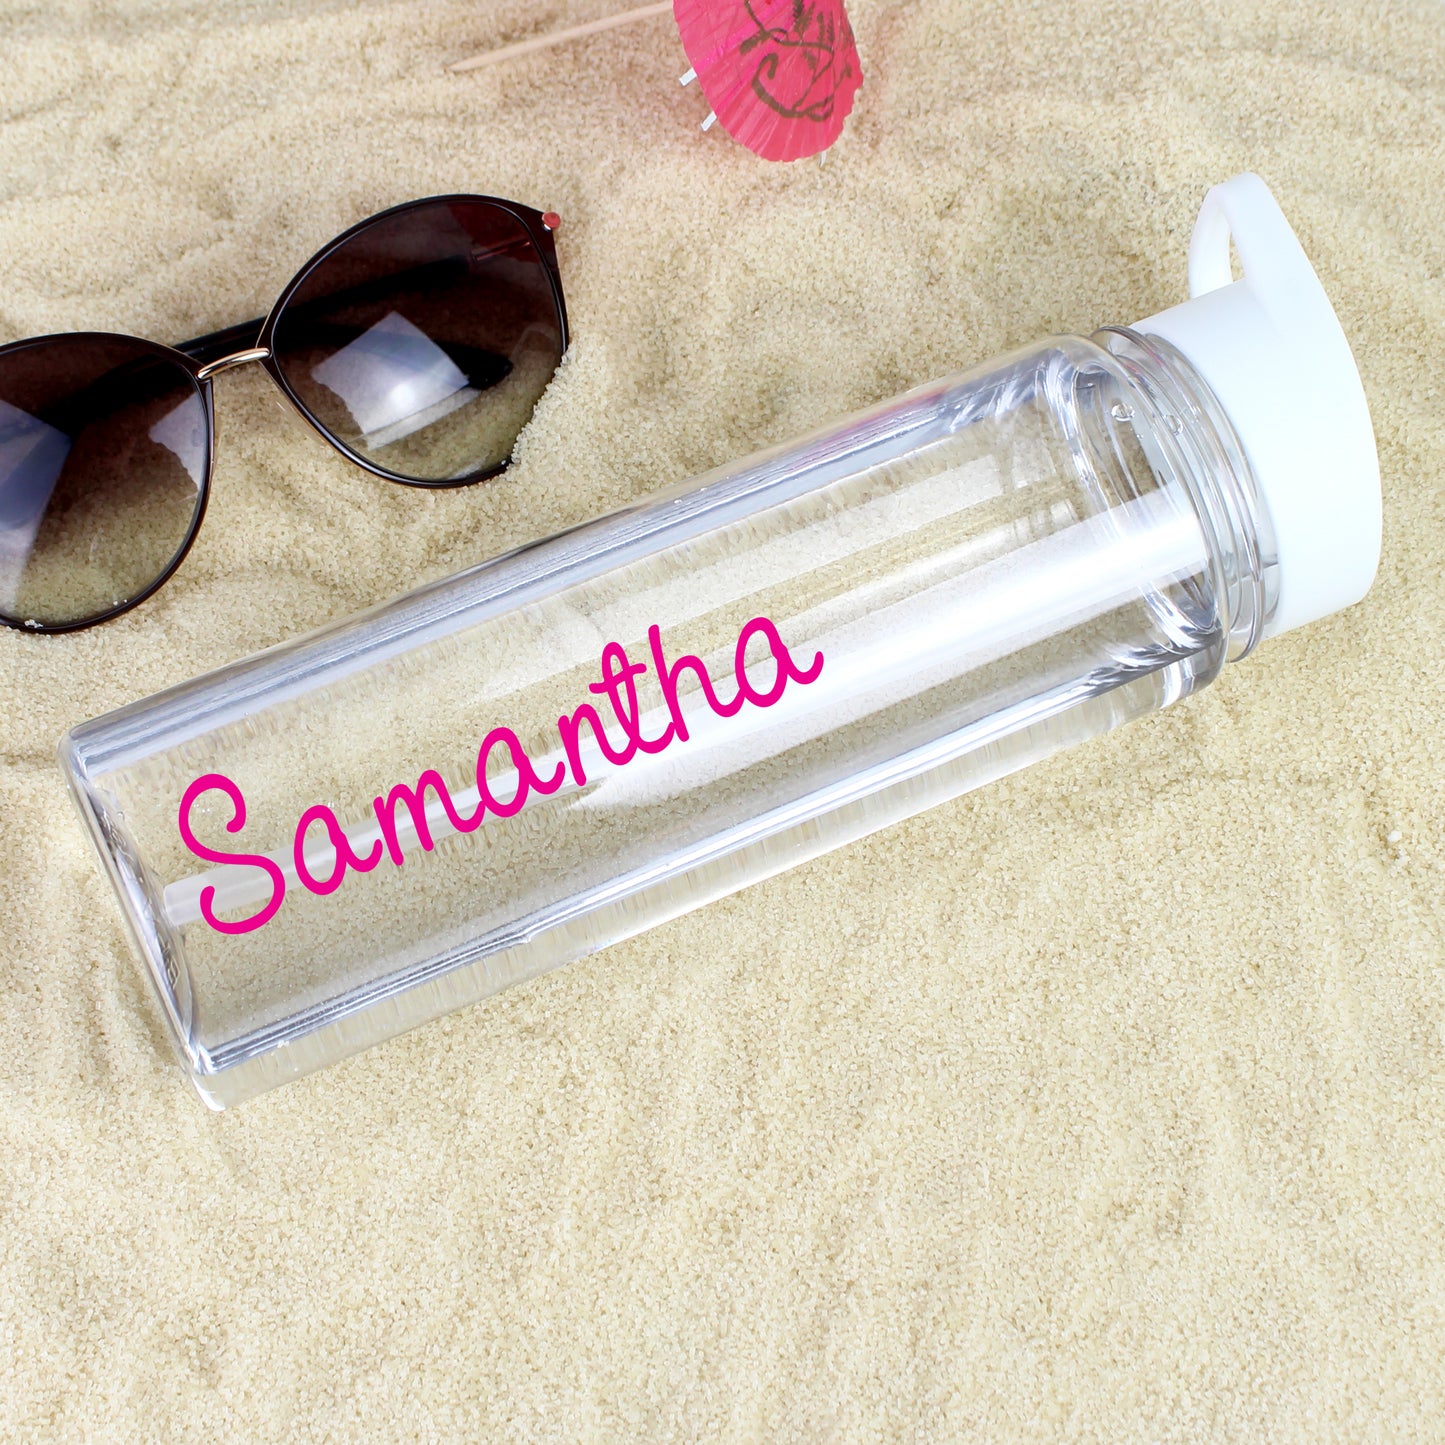 Personalised Pink Name Island Water Bottle - Personalise It!